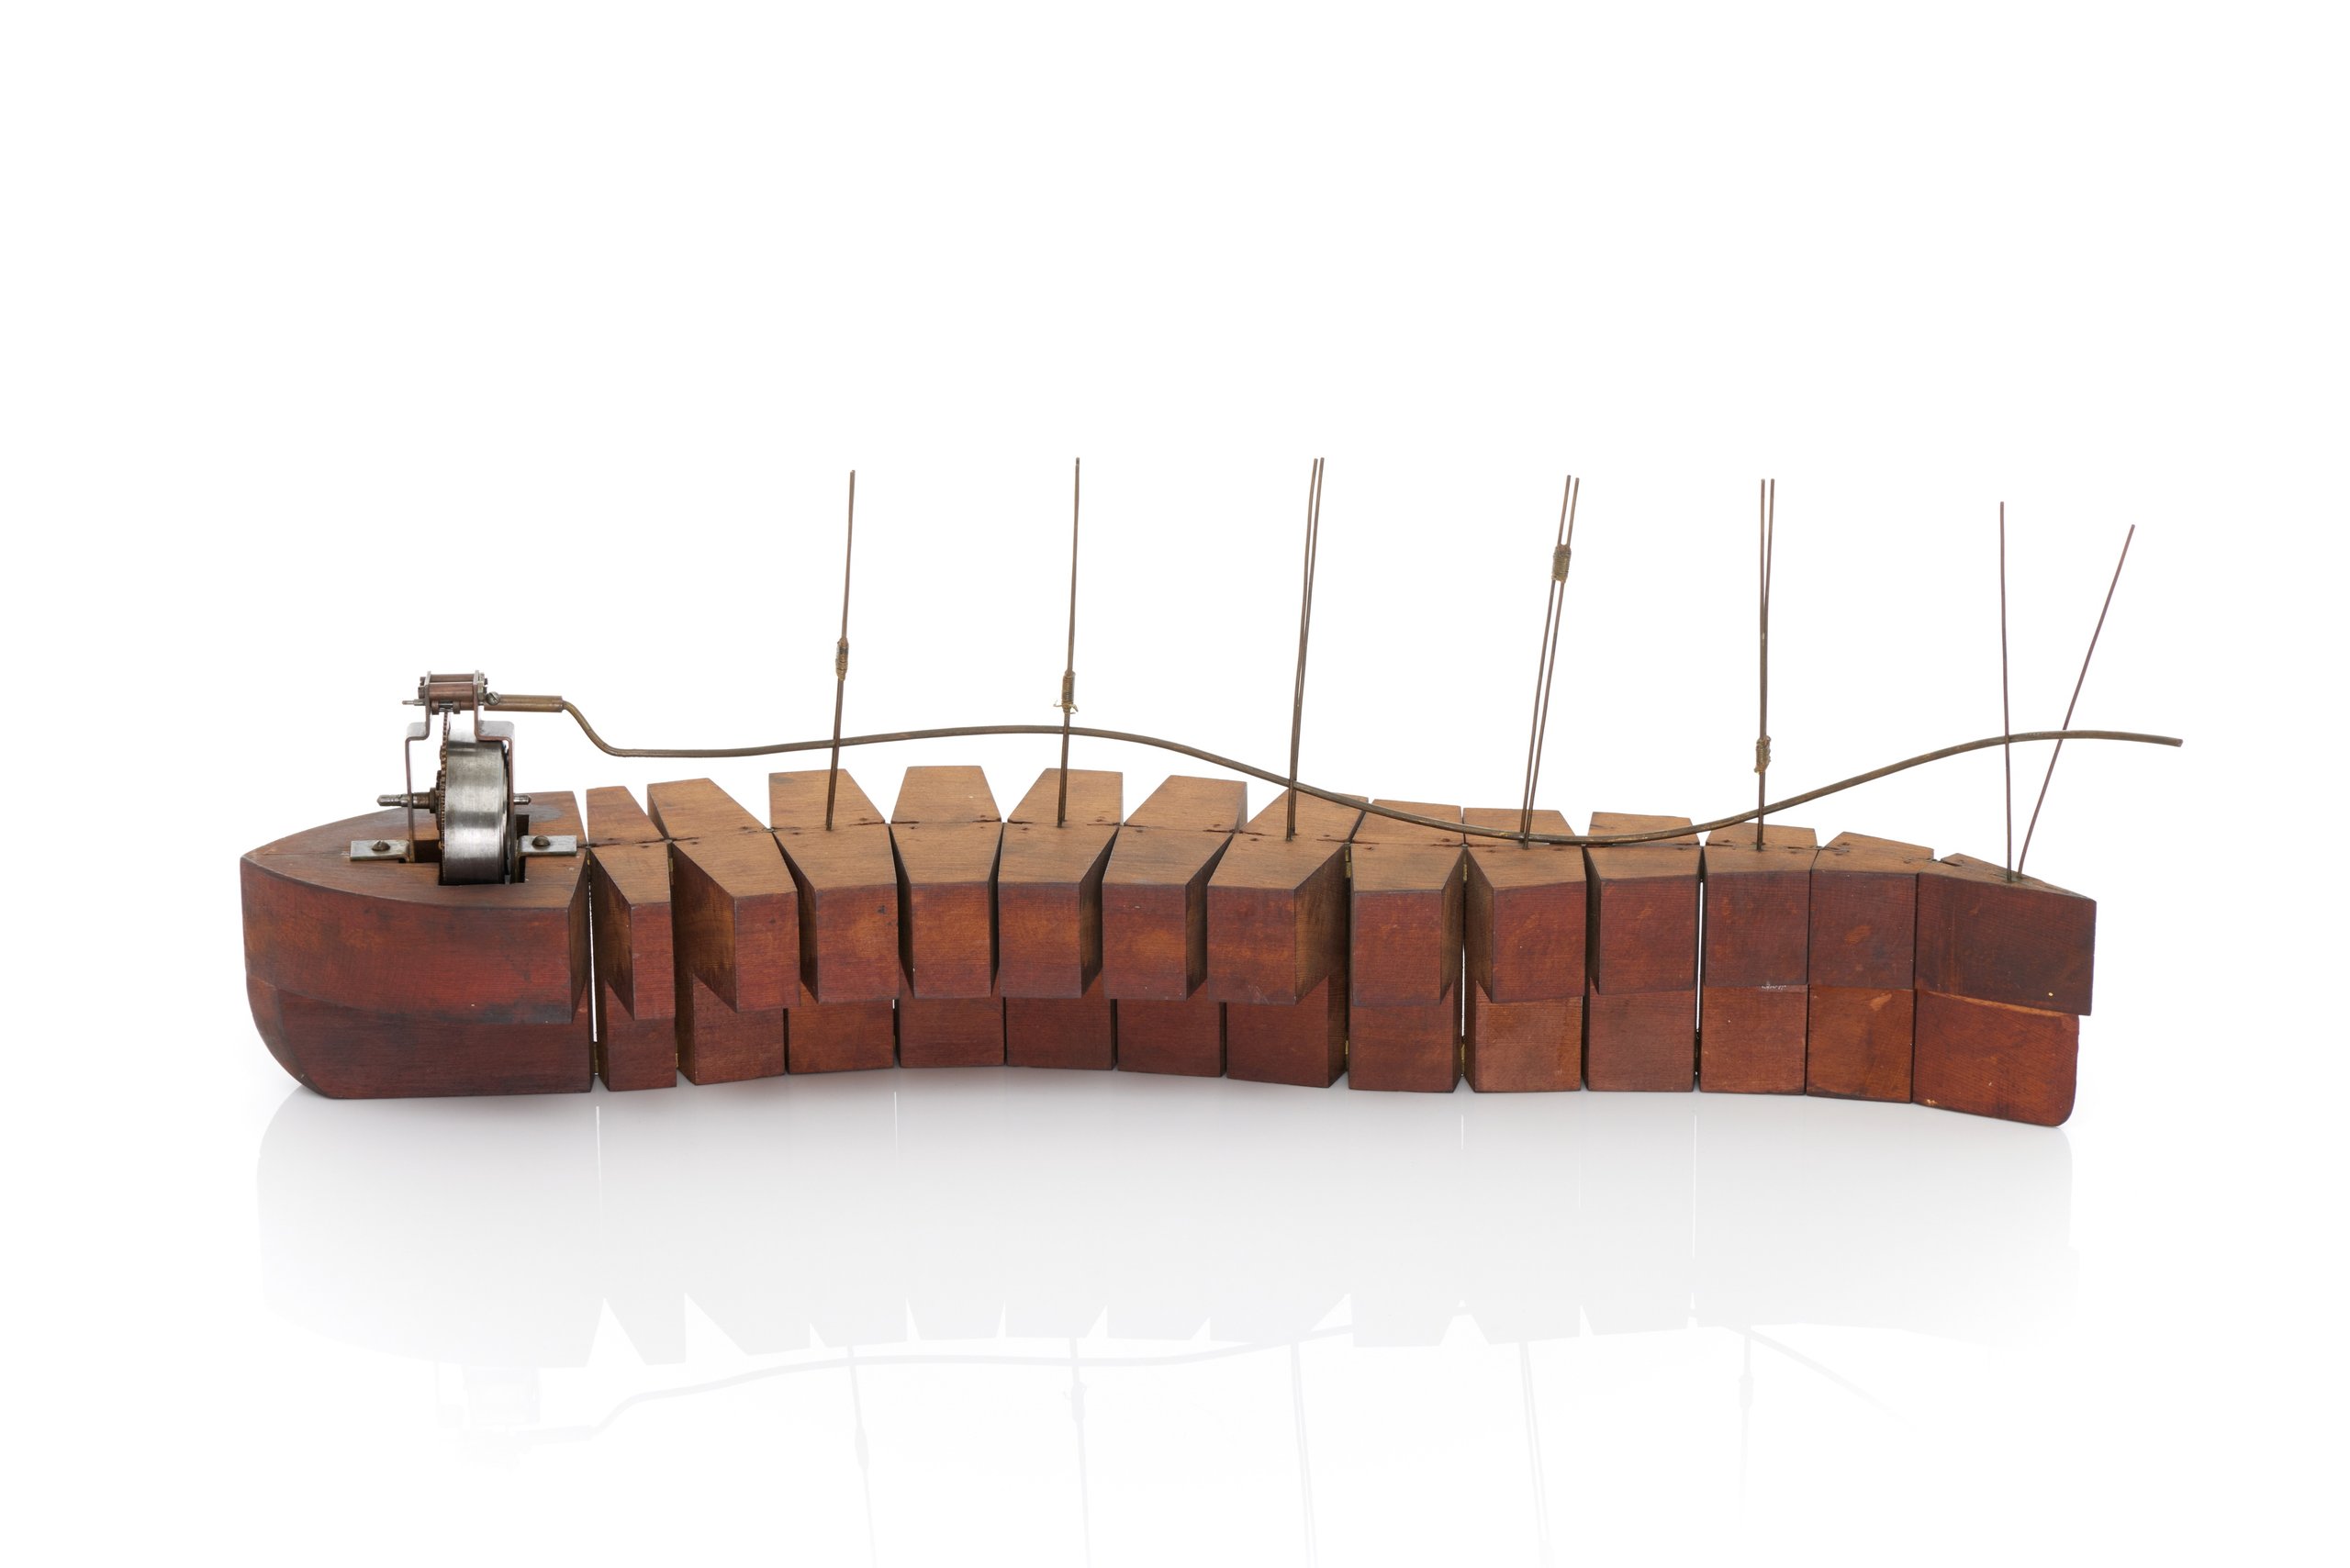 Model ship by Lawrence Hargrave